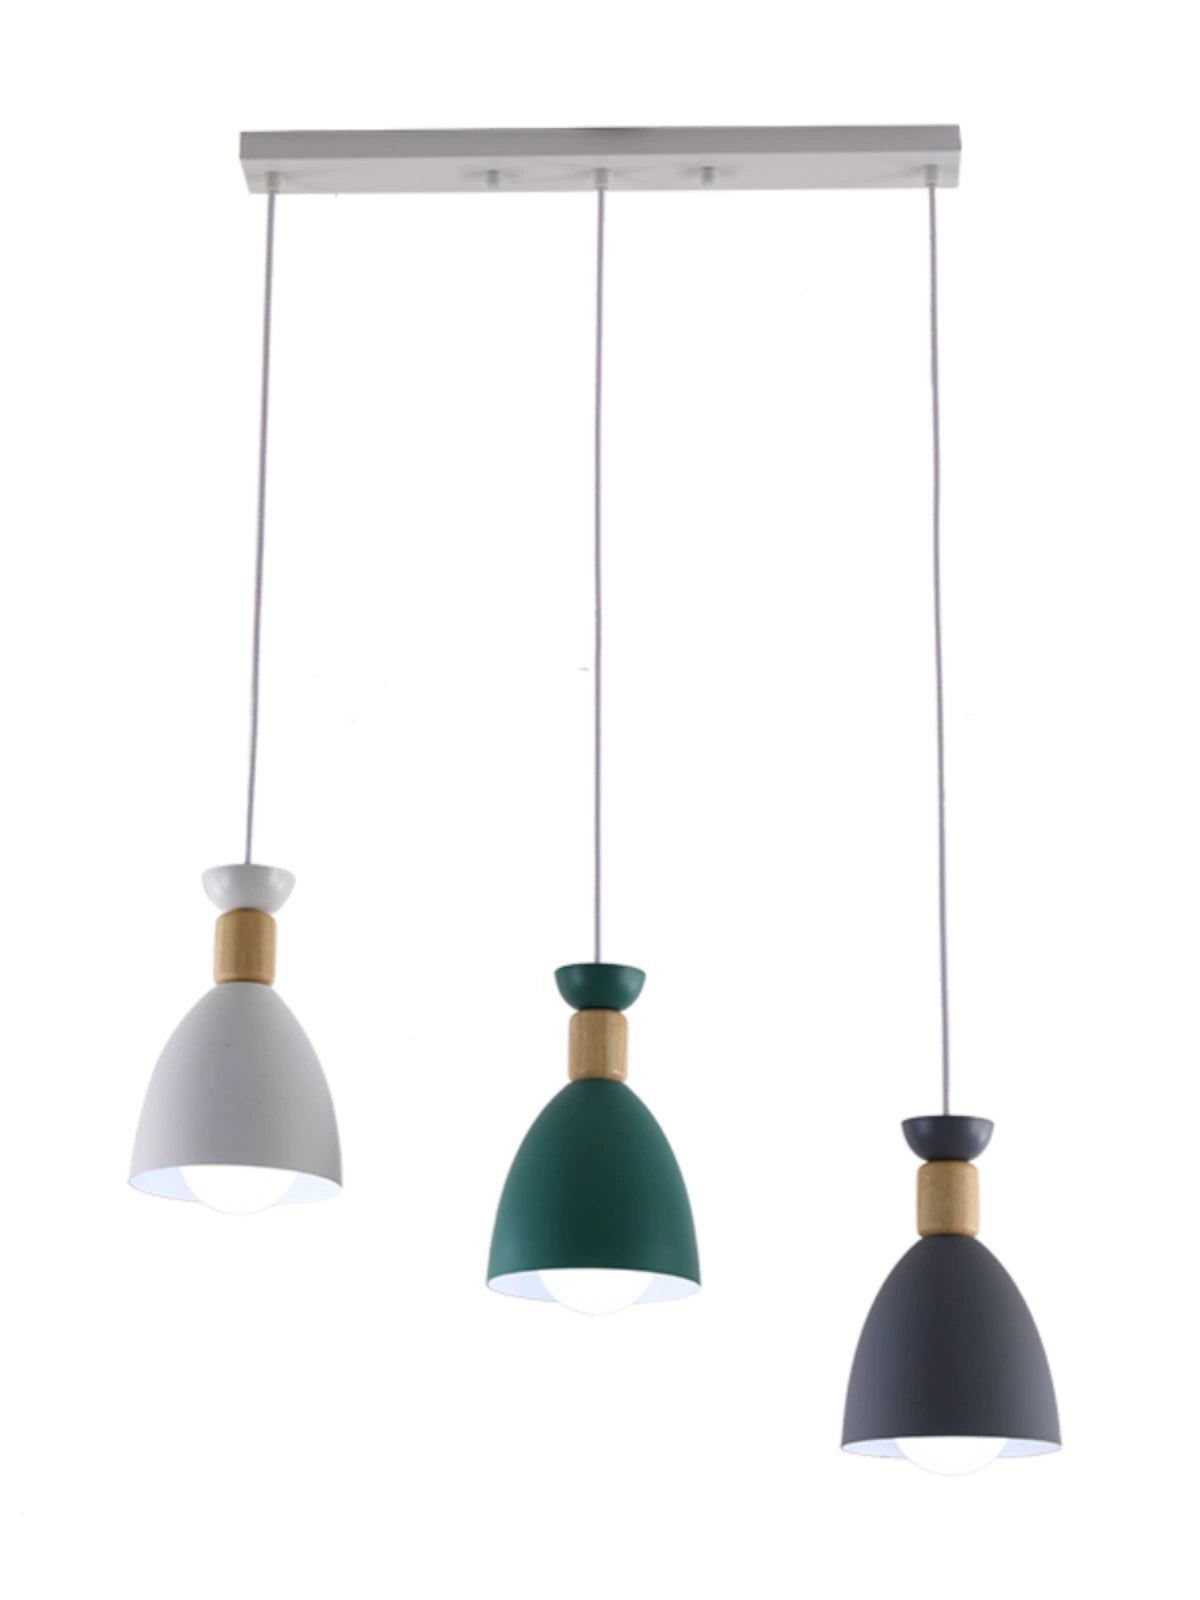 Nordic three-head household long macaron  lamp modern (Shipping not included)